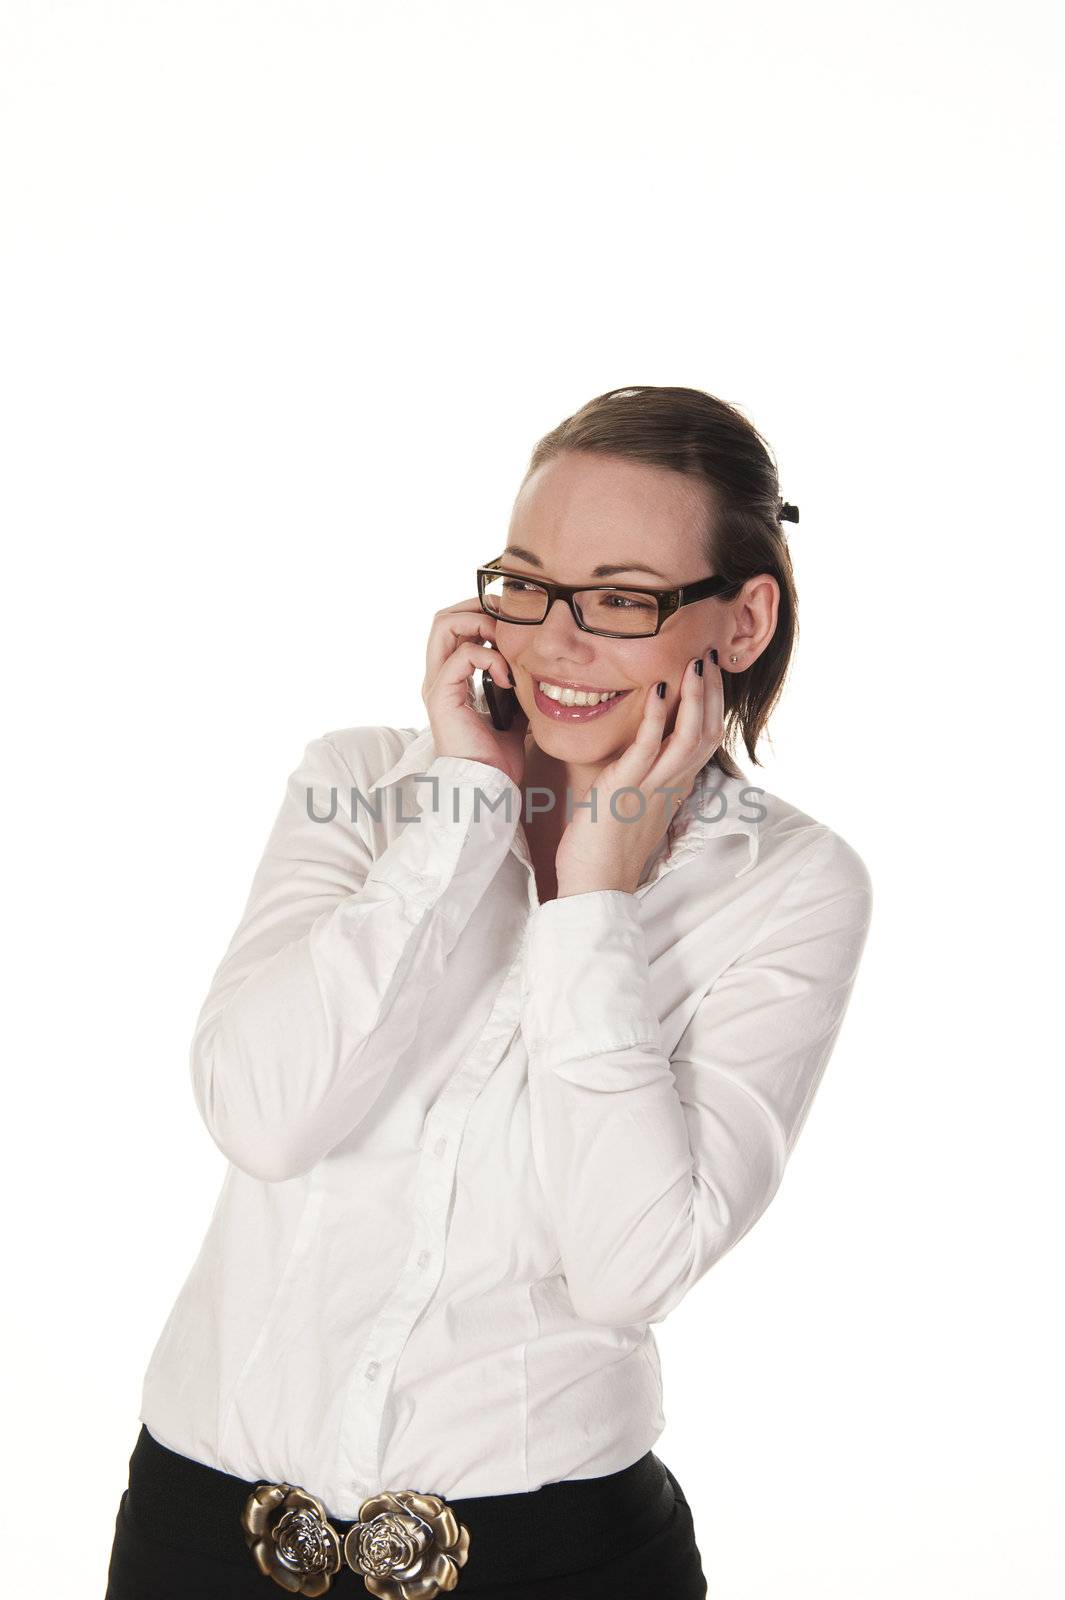 Smiling girl on the phone, isolated on white background